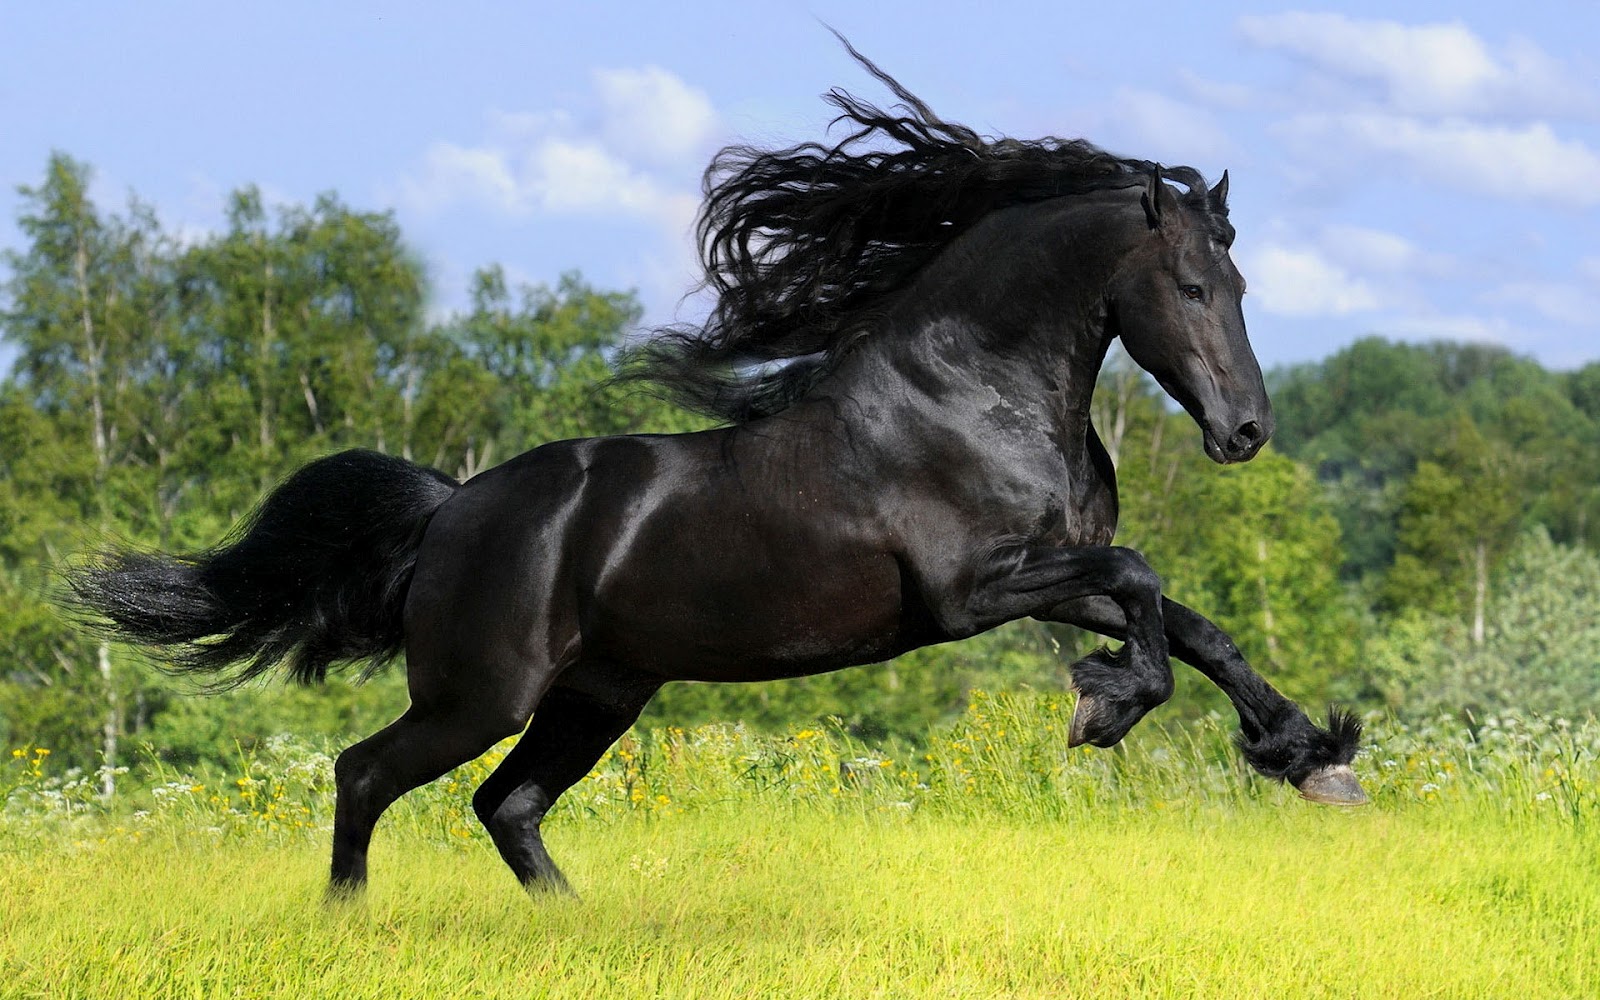 HD Animal Wallpaper Of A Beautiful Black Horse On Field With Grass